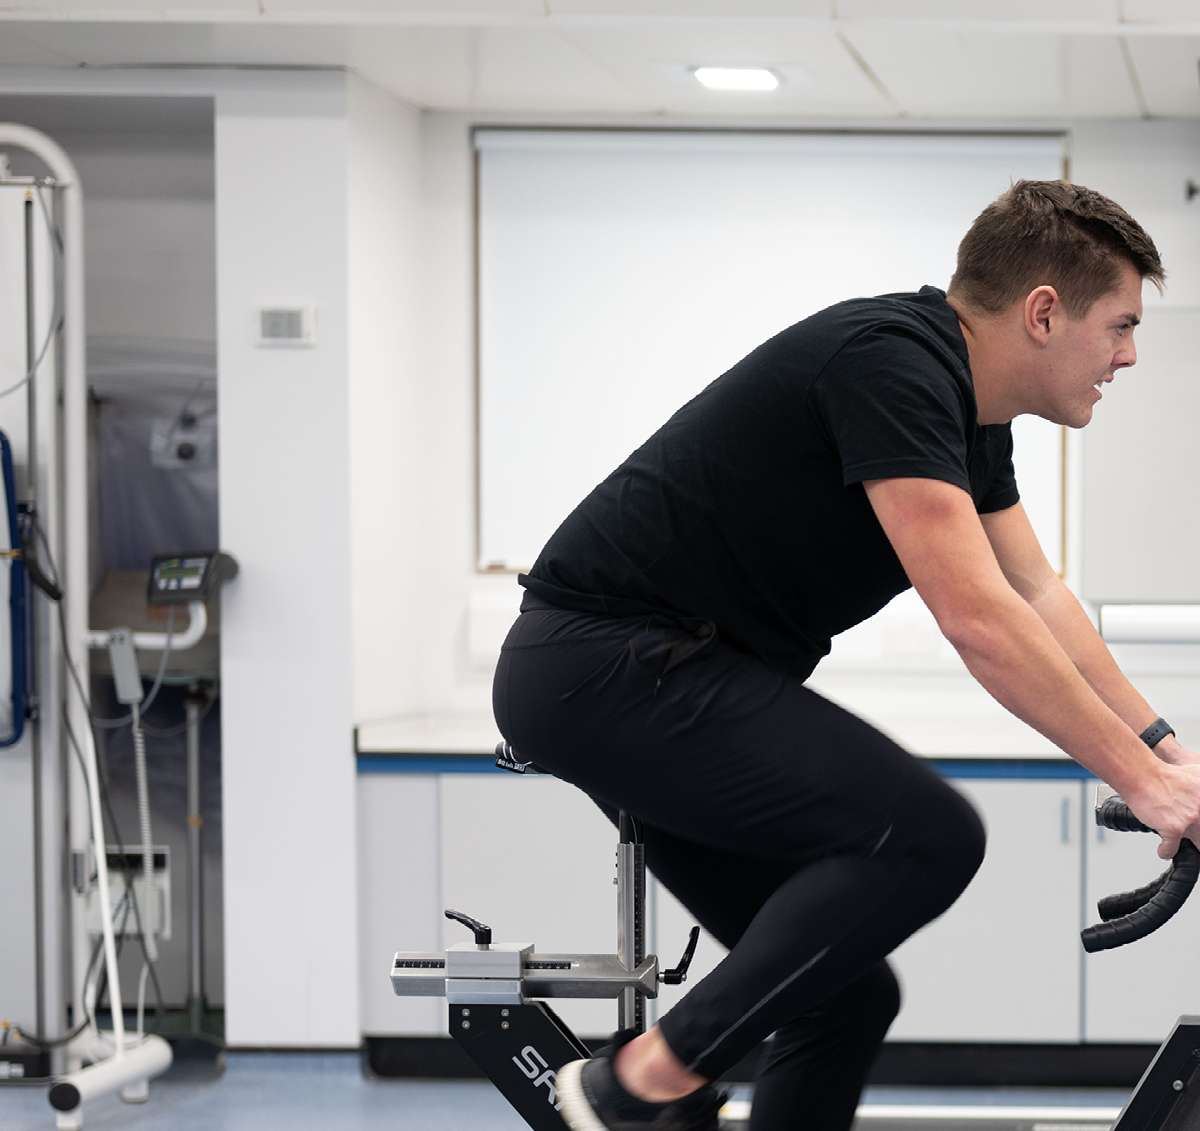 Sport and Exercise Science (Coaching) BSc (Hons) degree course